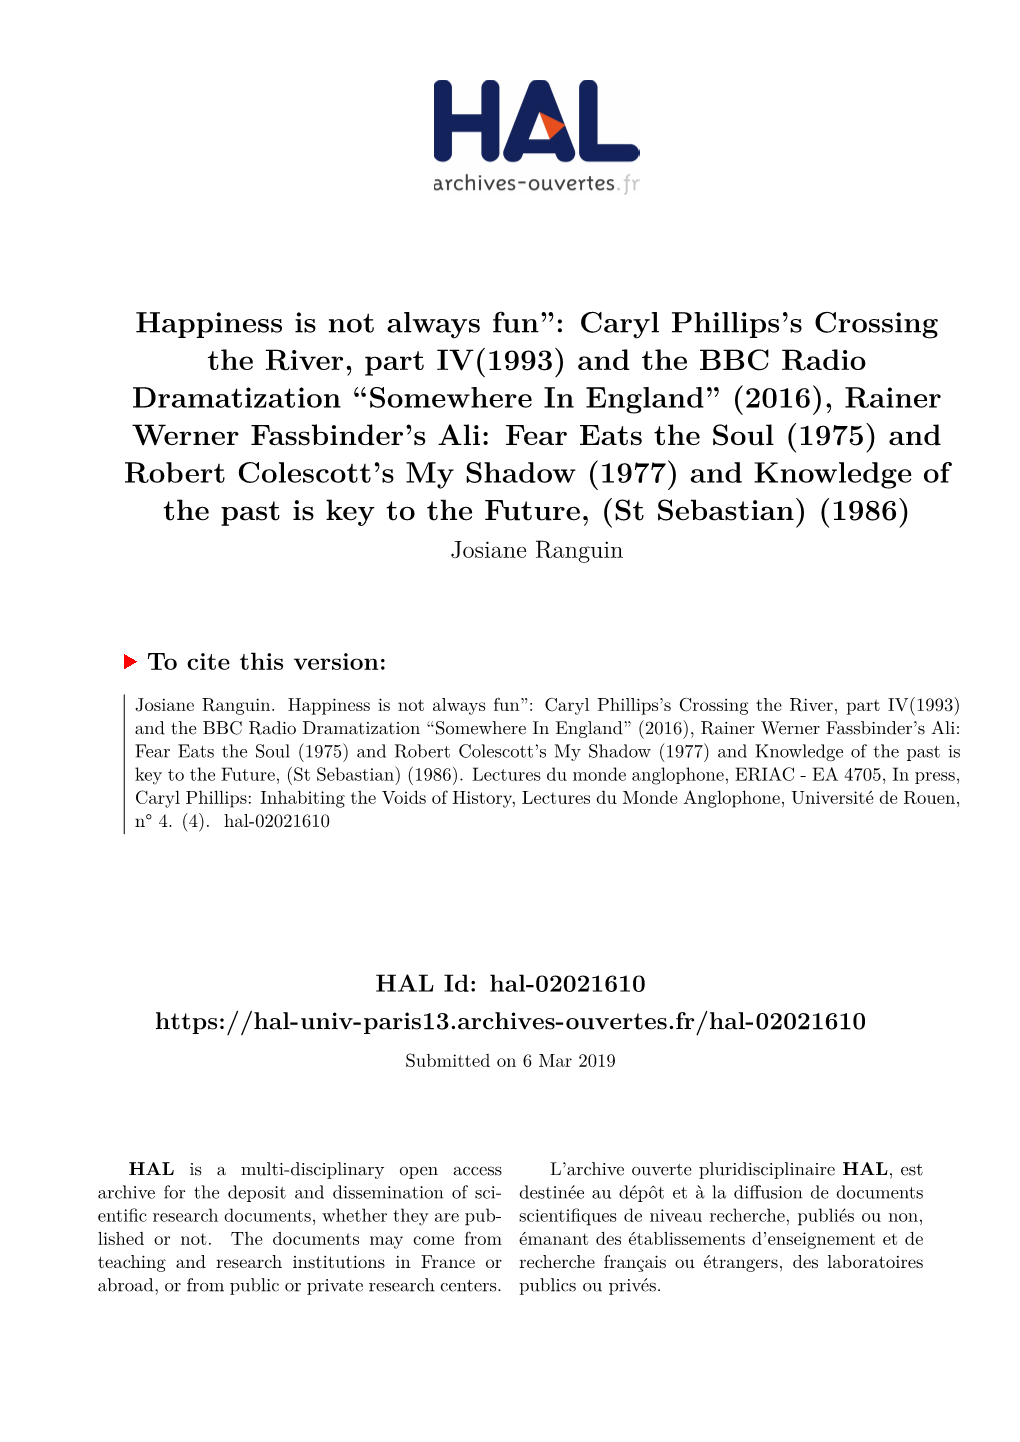 Happiness Is Not Always Fun'': Caryl Phillips's Crossing the River, Part IV(1993) and the BBC Radio Dramatization